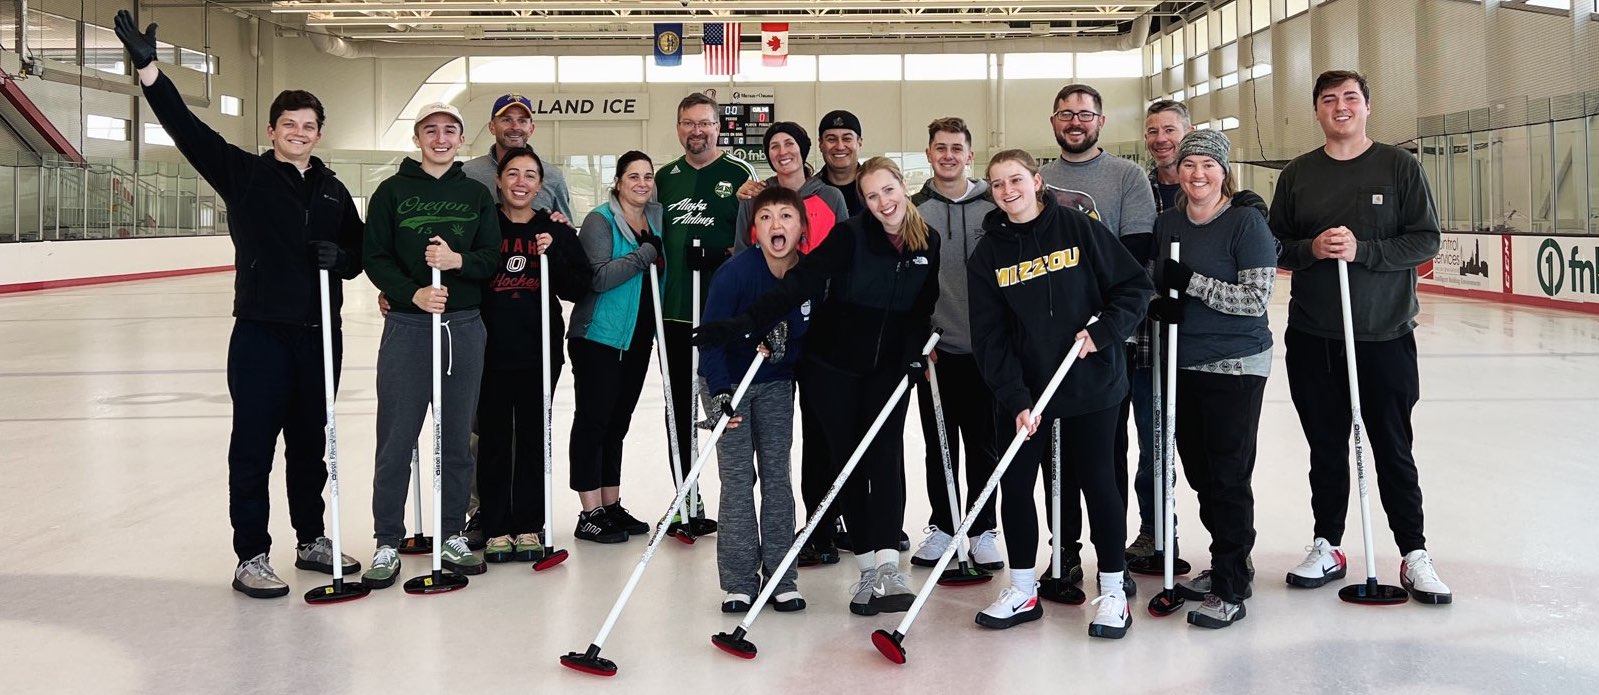 Try Curling in Omaha!